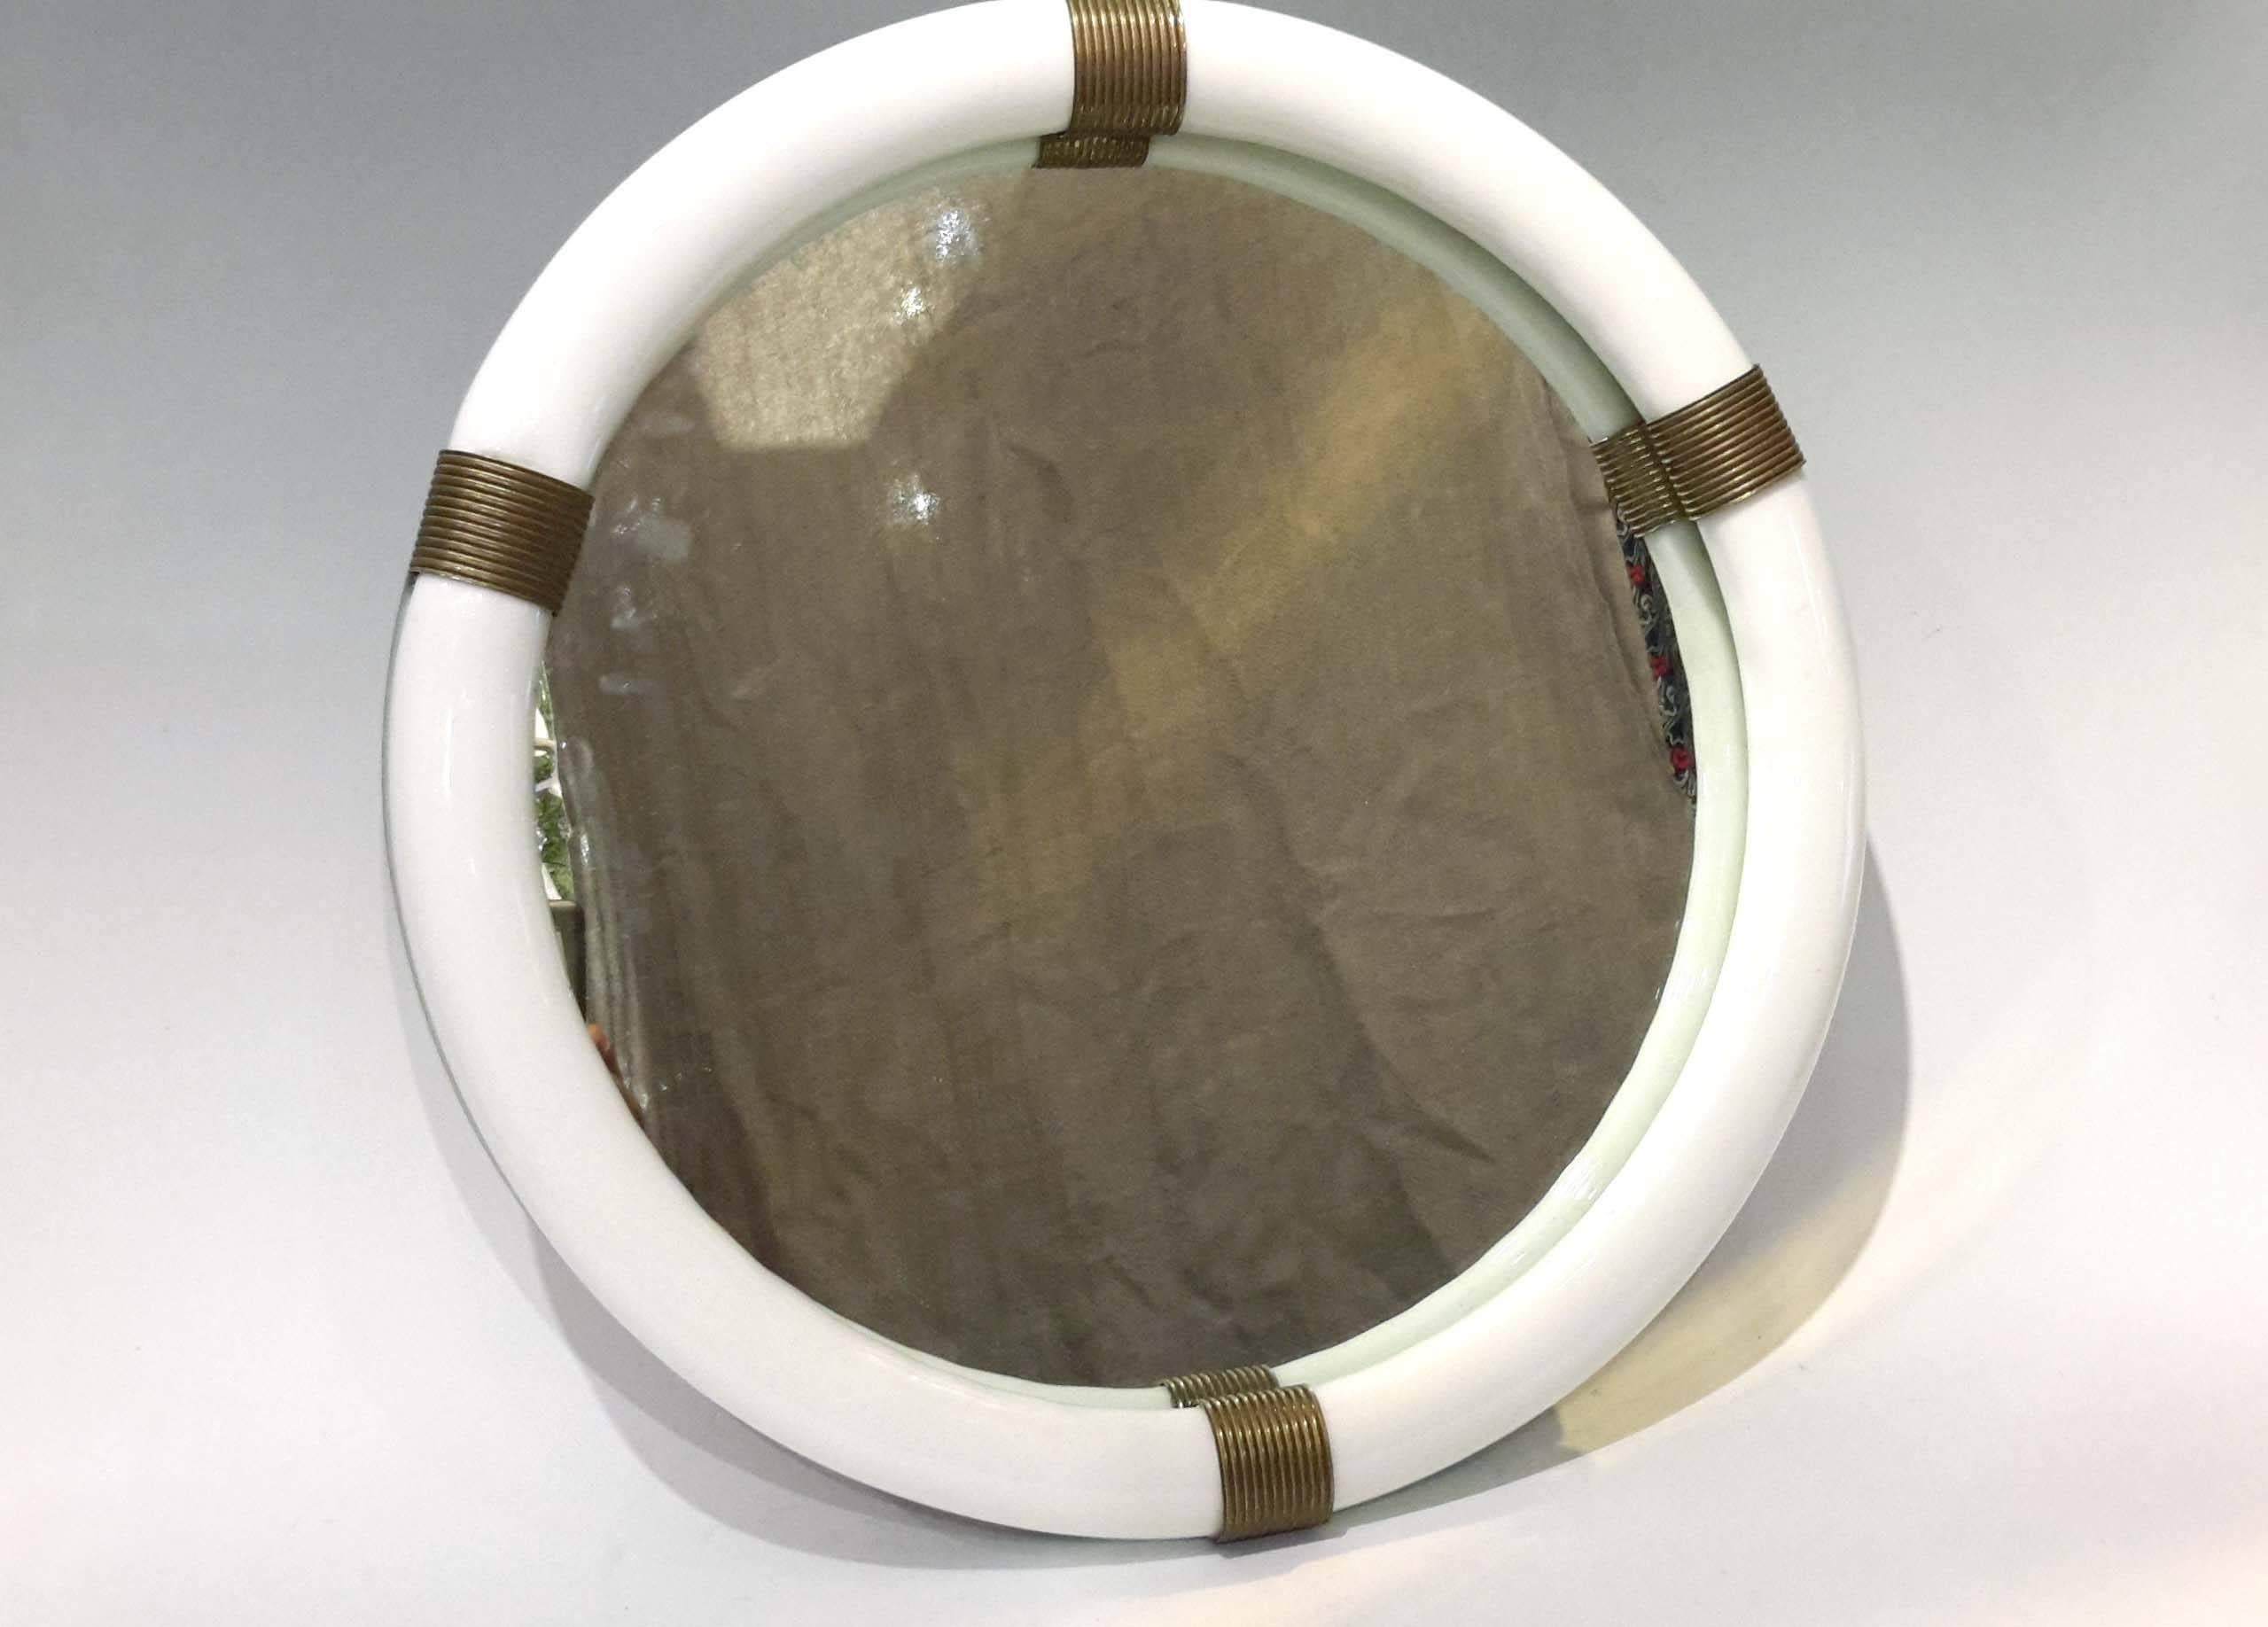 16.50 inches in diameter, 1.25 inches deep
A vintage Venini handblown Murano opaline glass framed round wall mirror with bronze decorative accent.